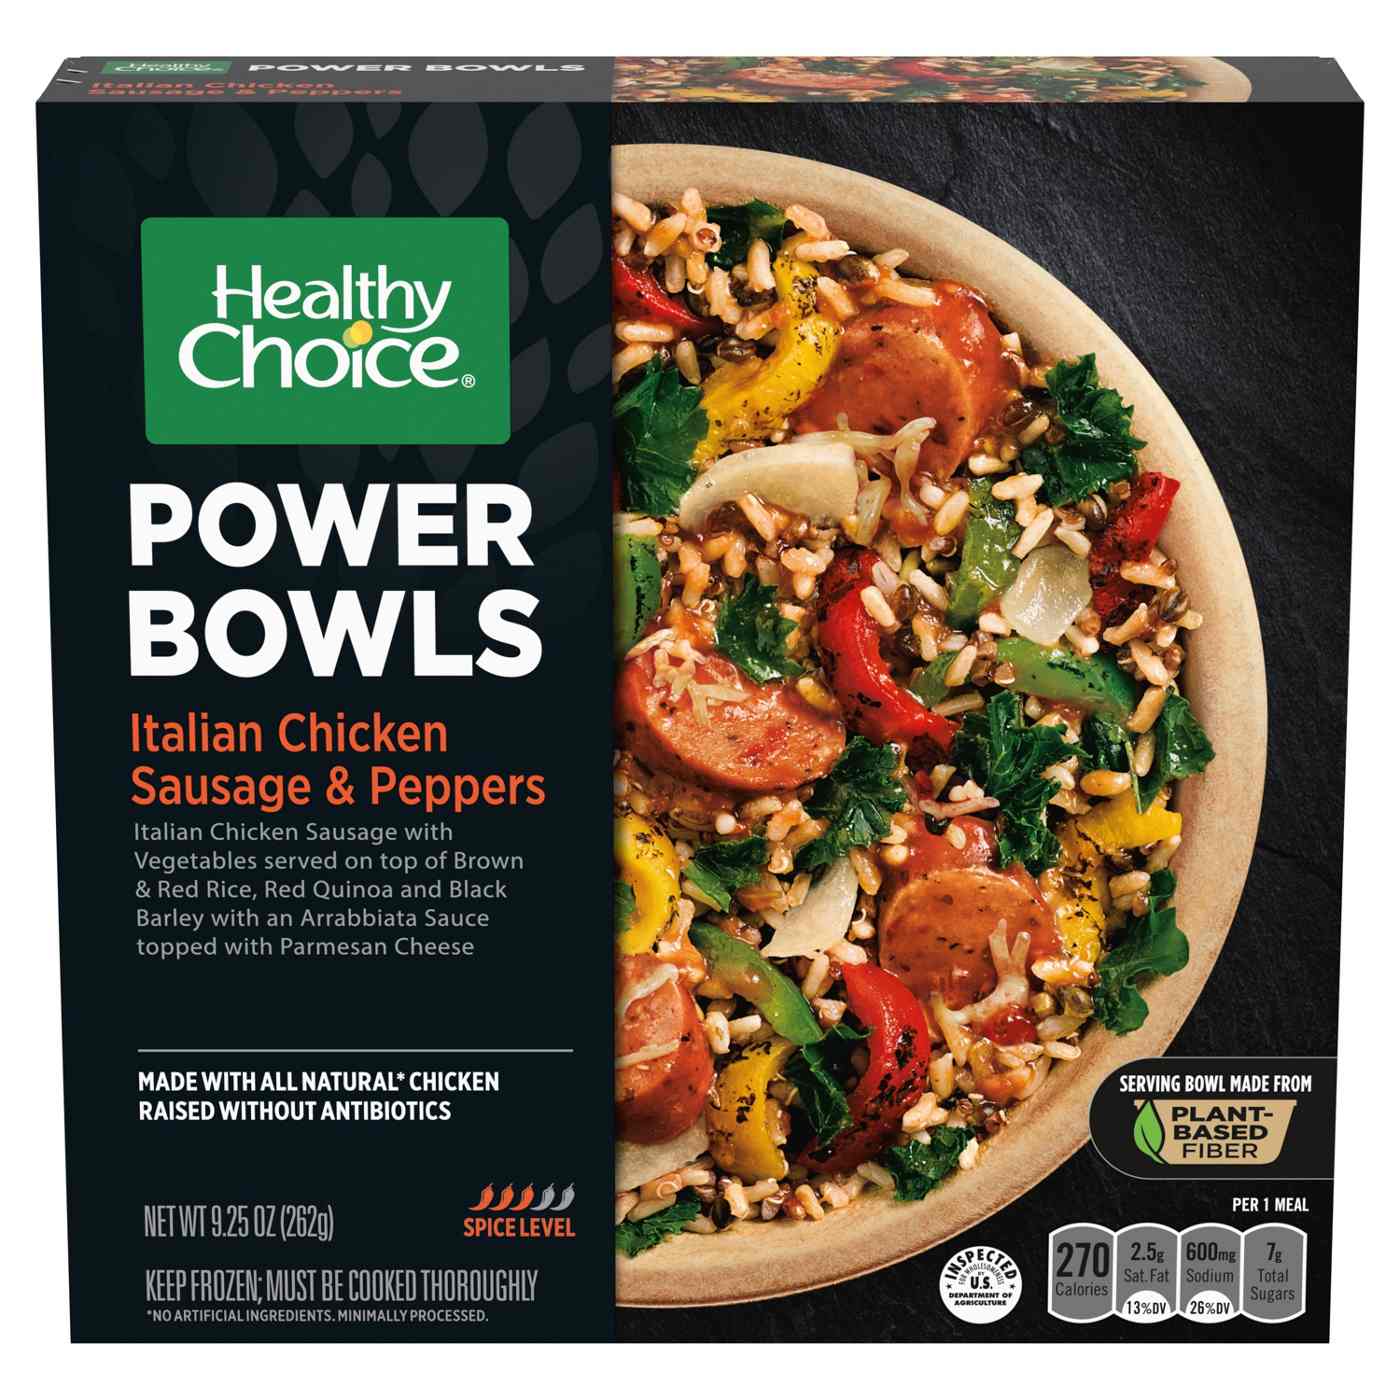 Healthy Choice Power Bowls Italian Chicken Sausage & Peppers Frozen Meal; image 1 of 7